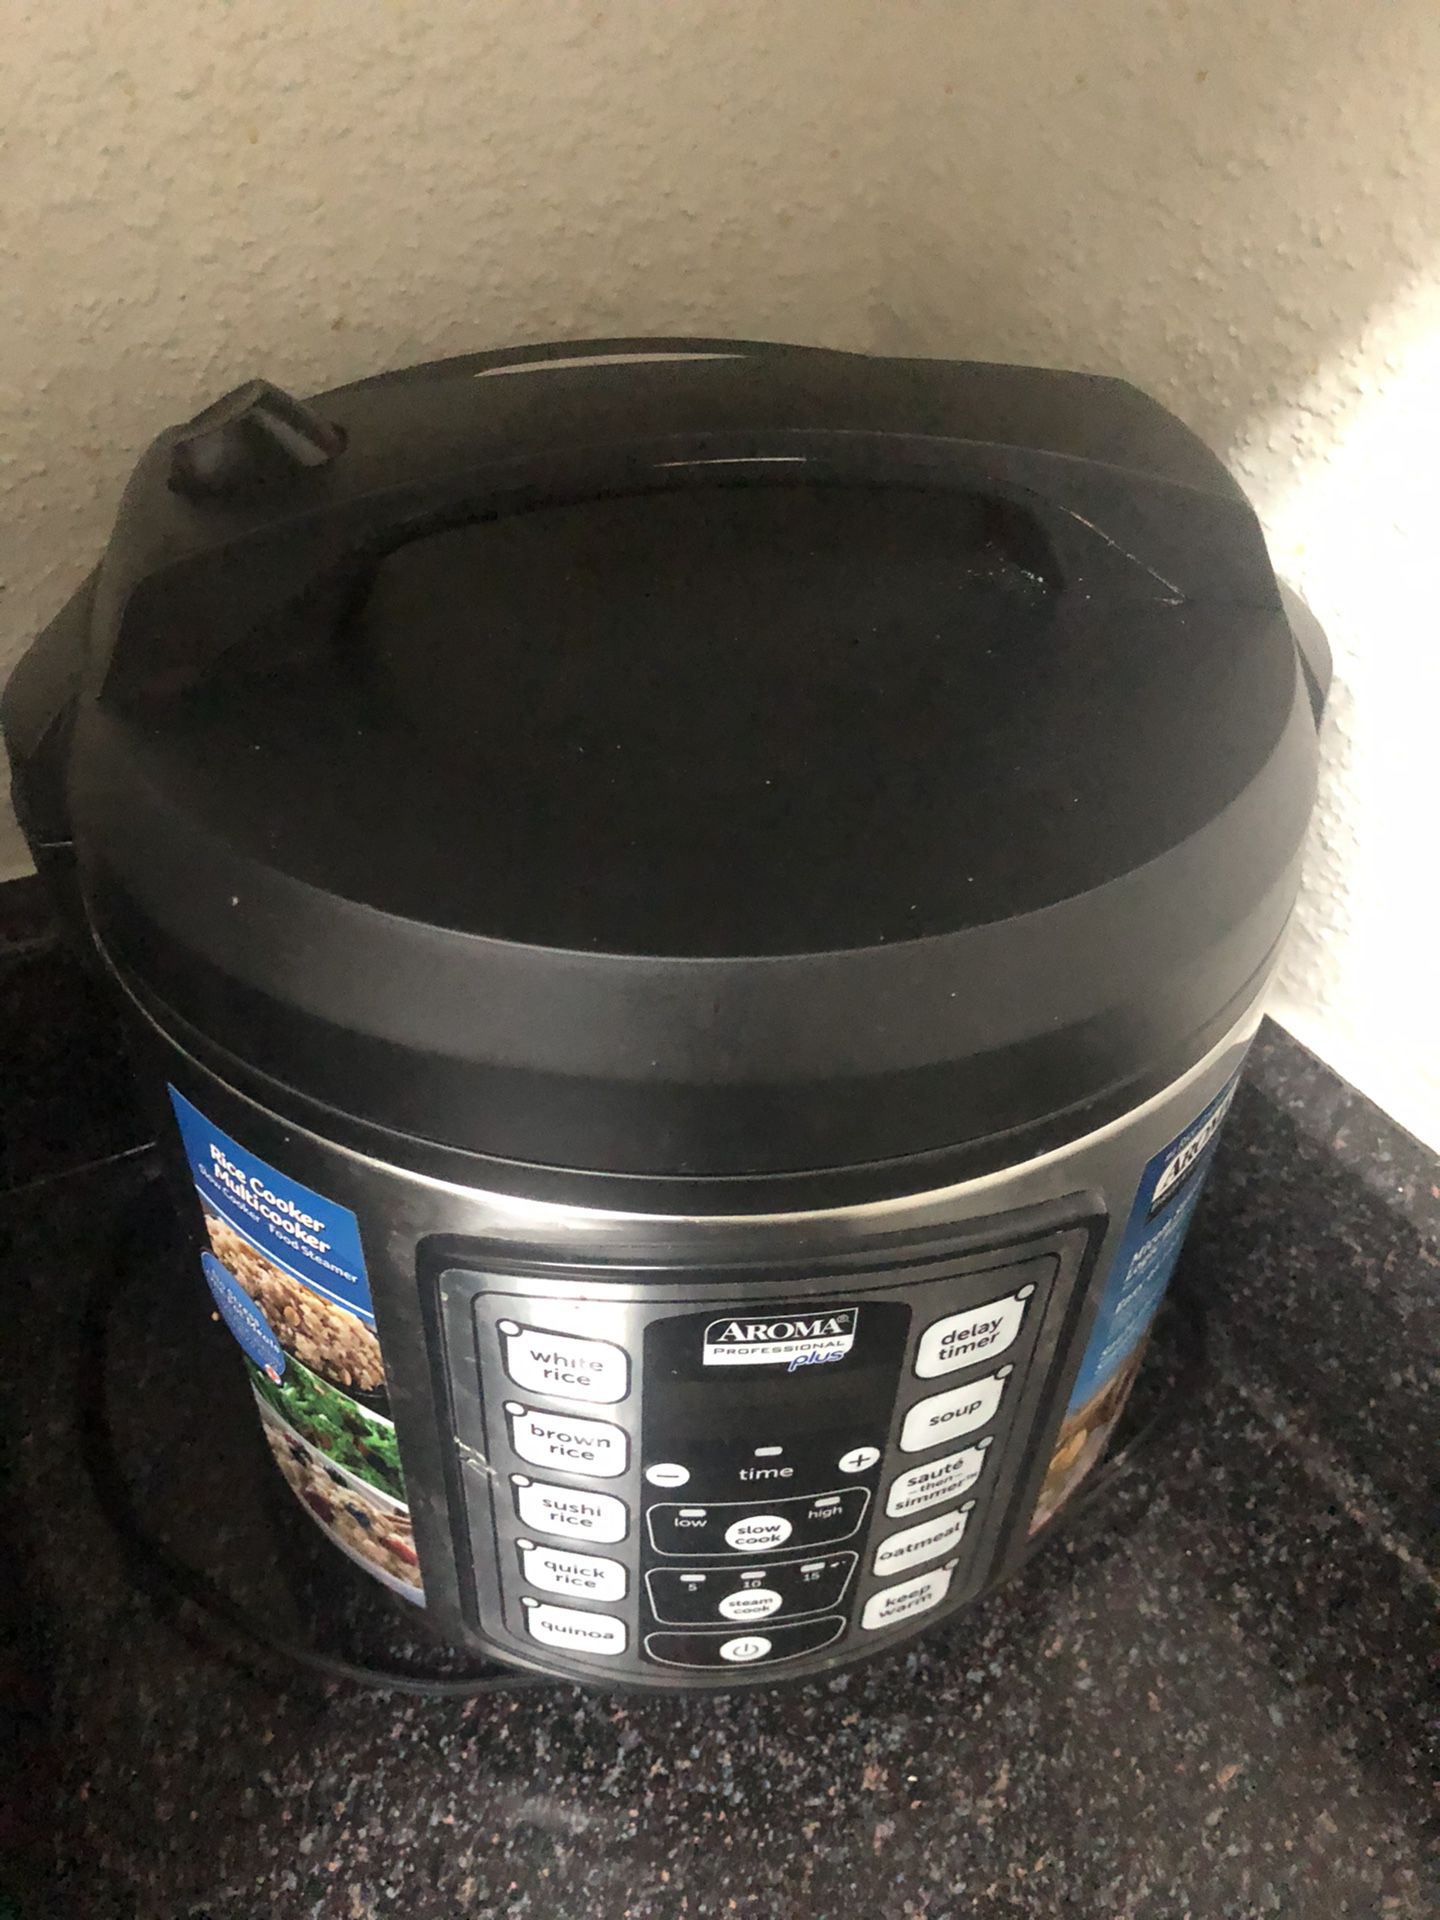 Aroma Rice cooker